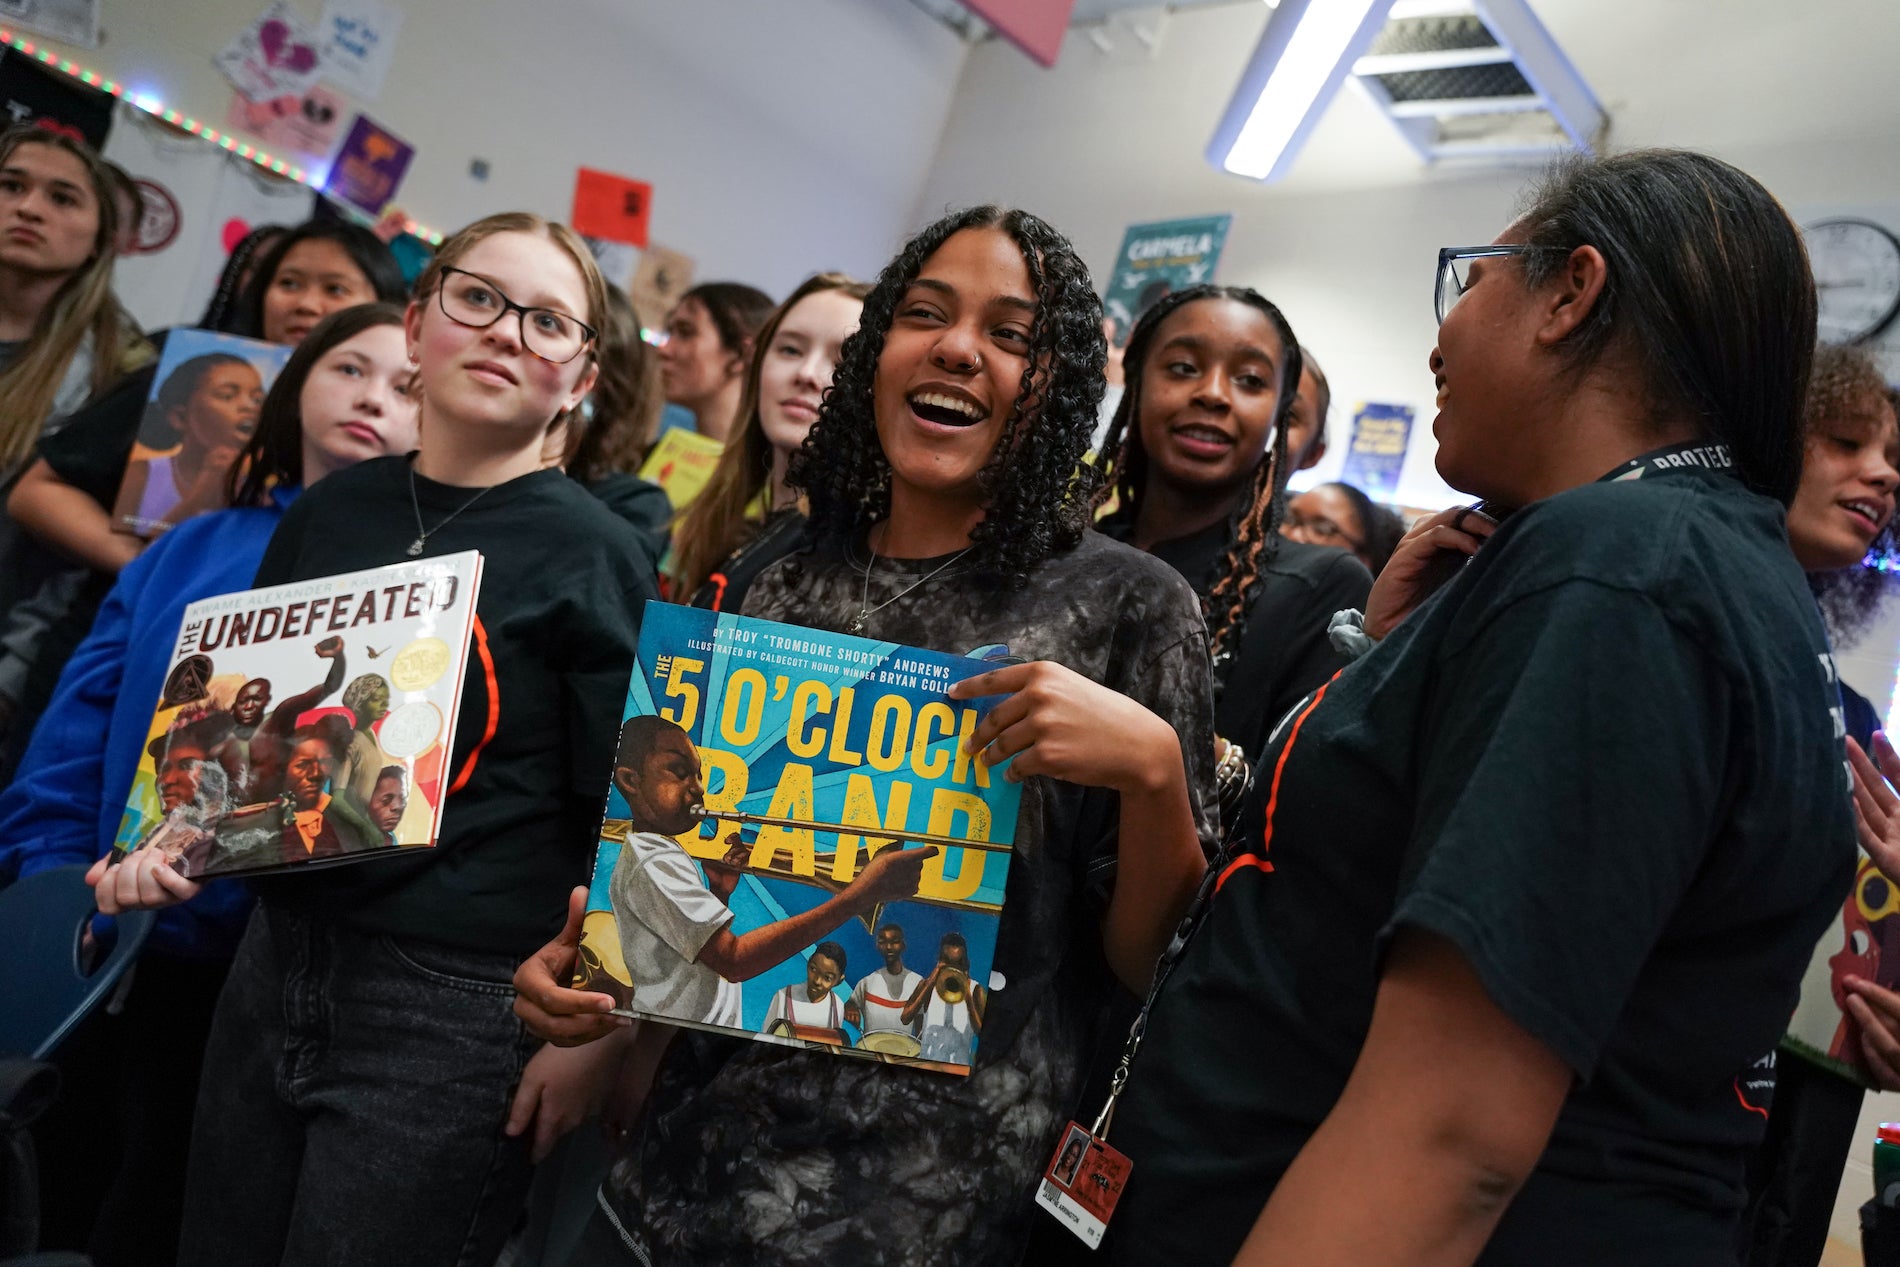 Schooled: Meet the Pa. students, teachers who defeated a school book ban -  WHYY